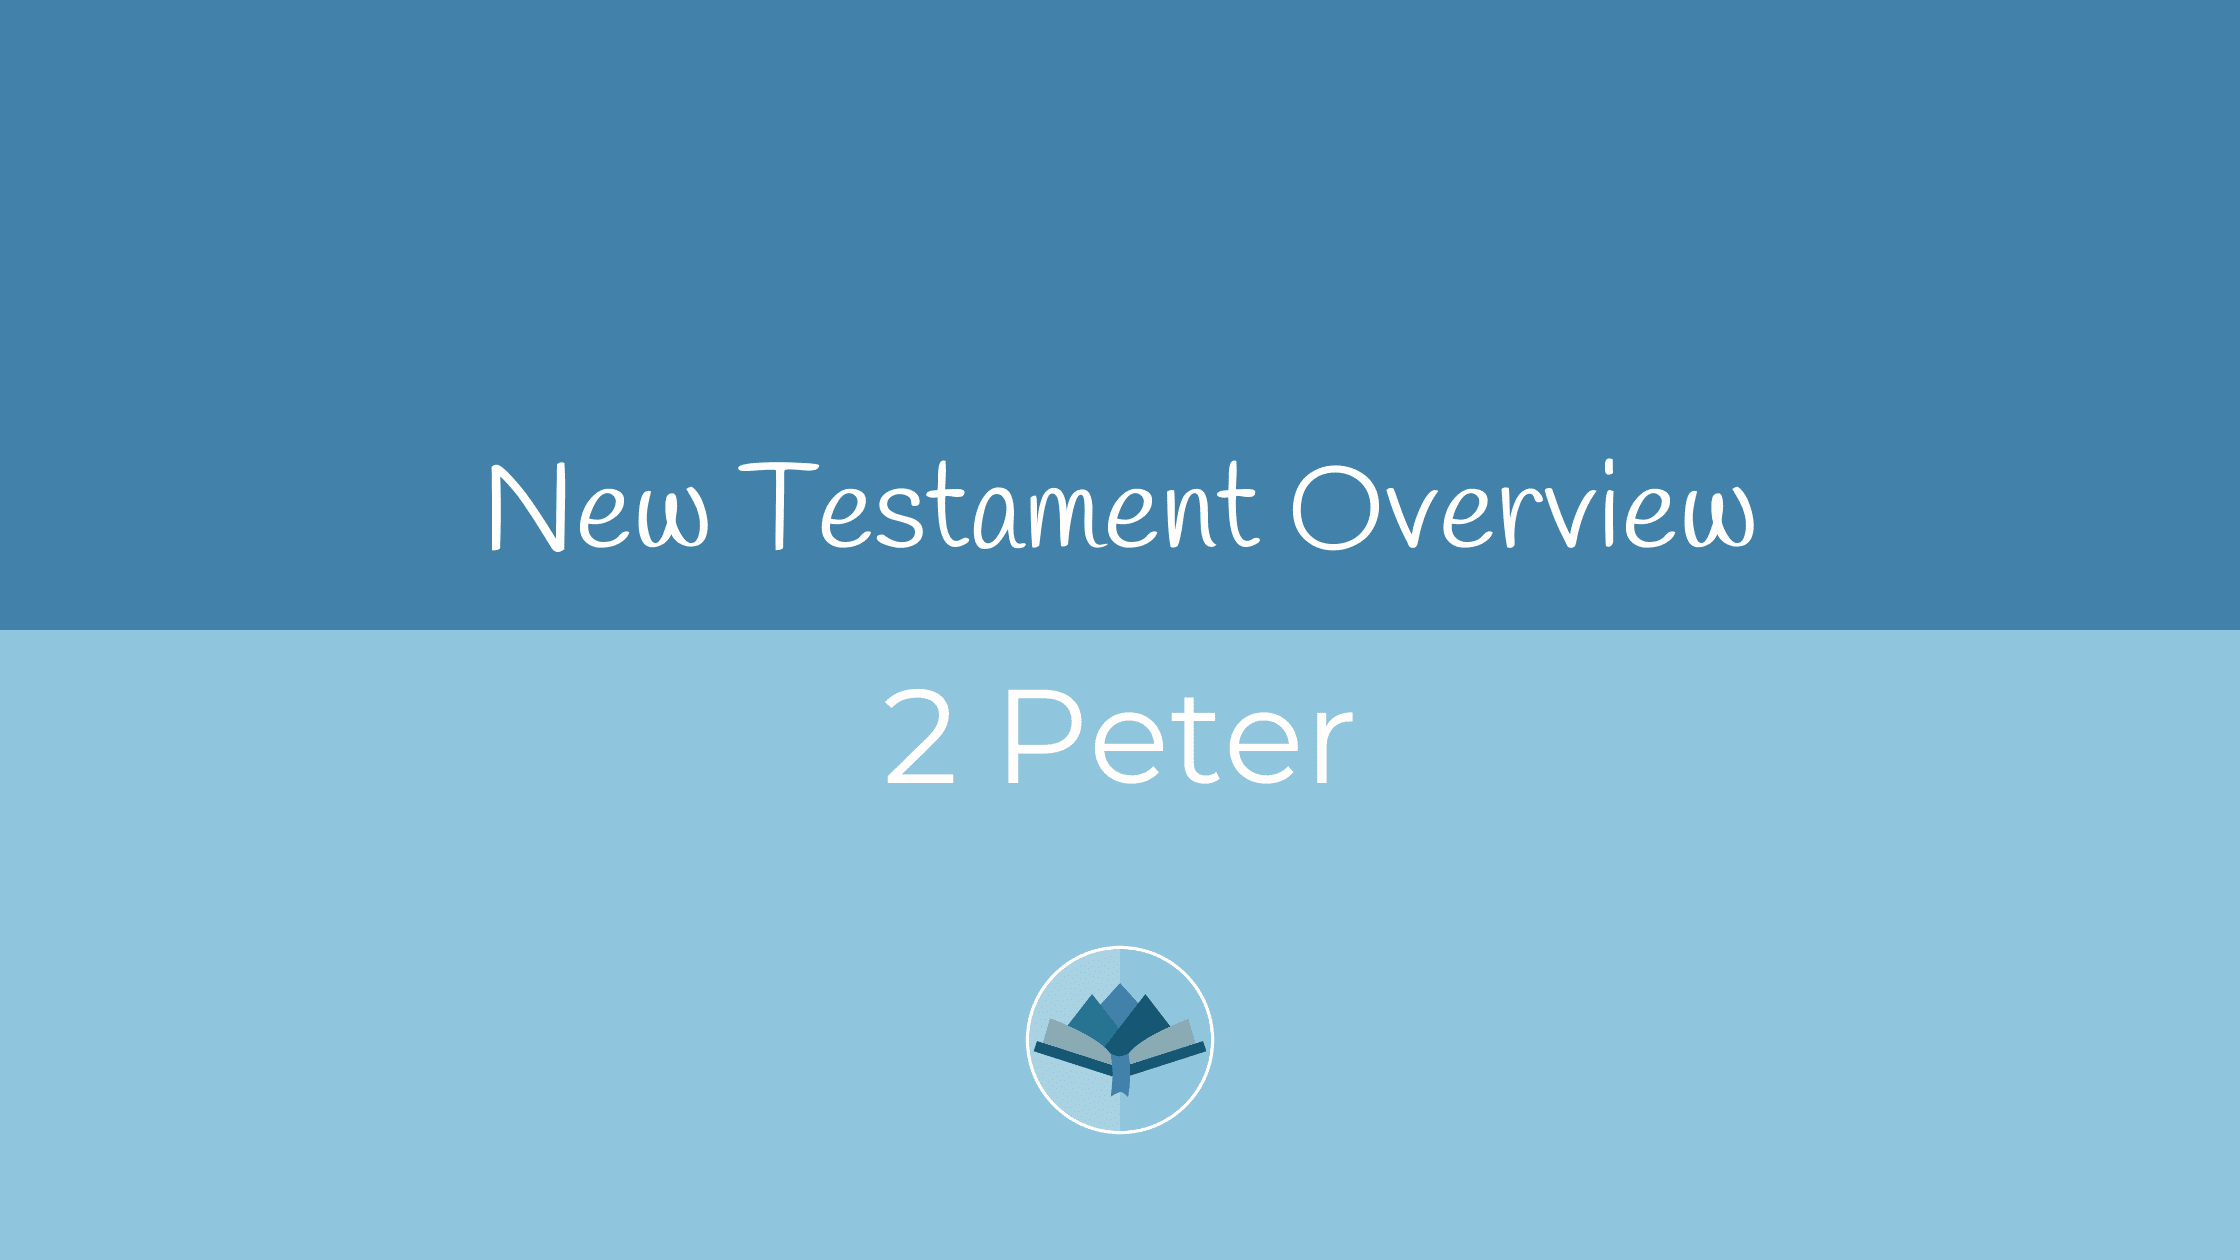 2 Peter Overview